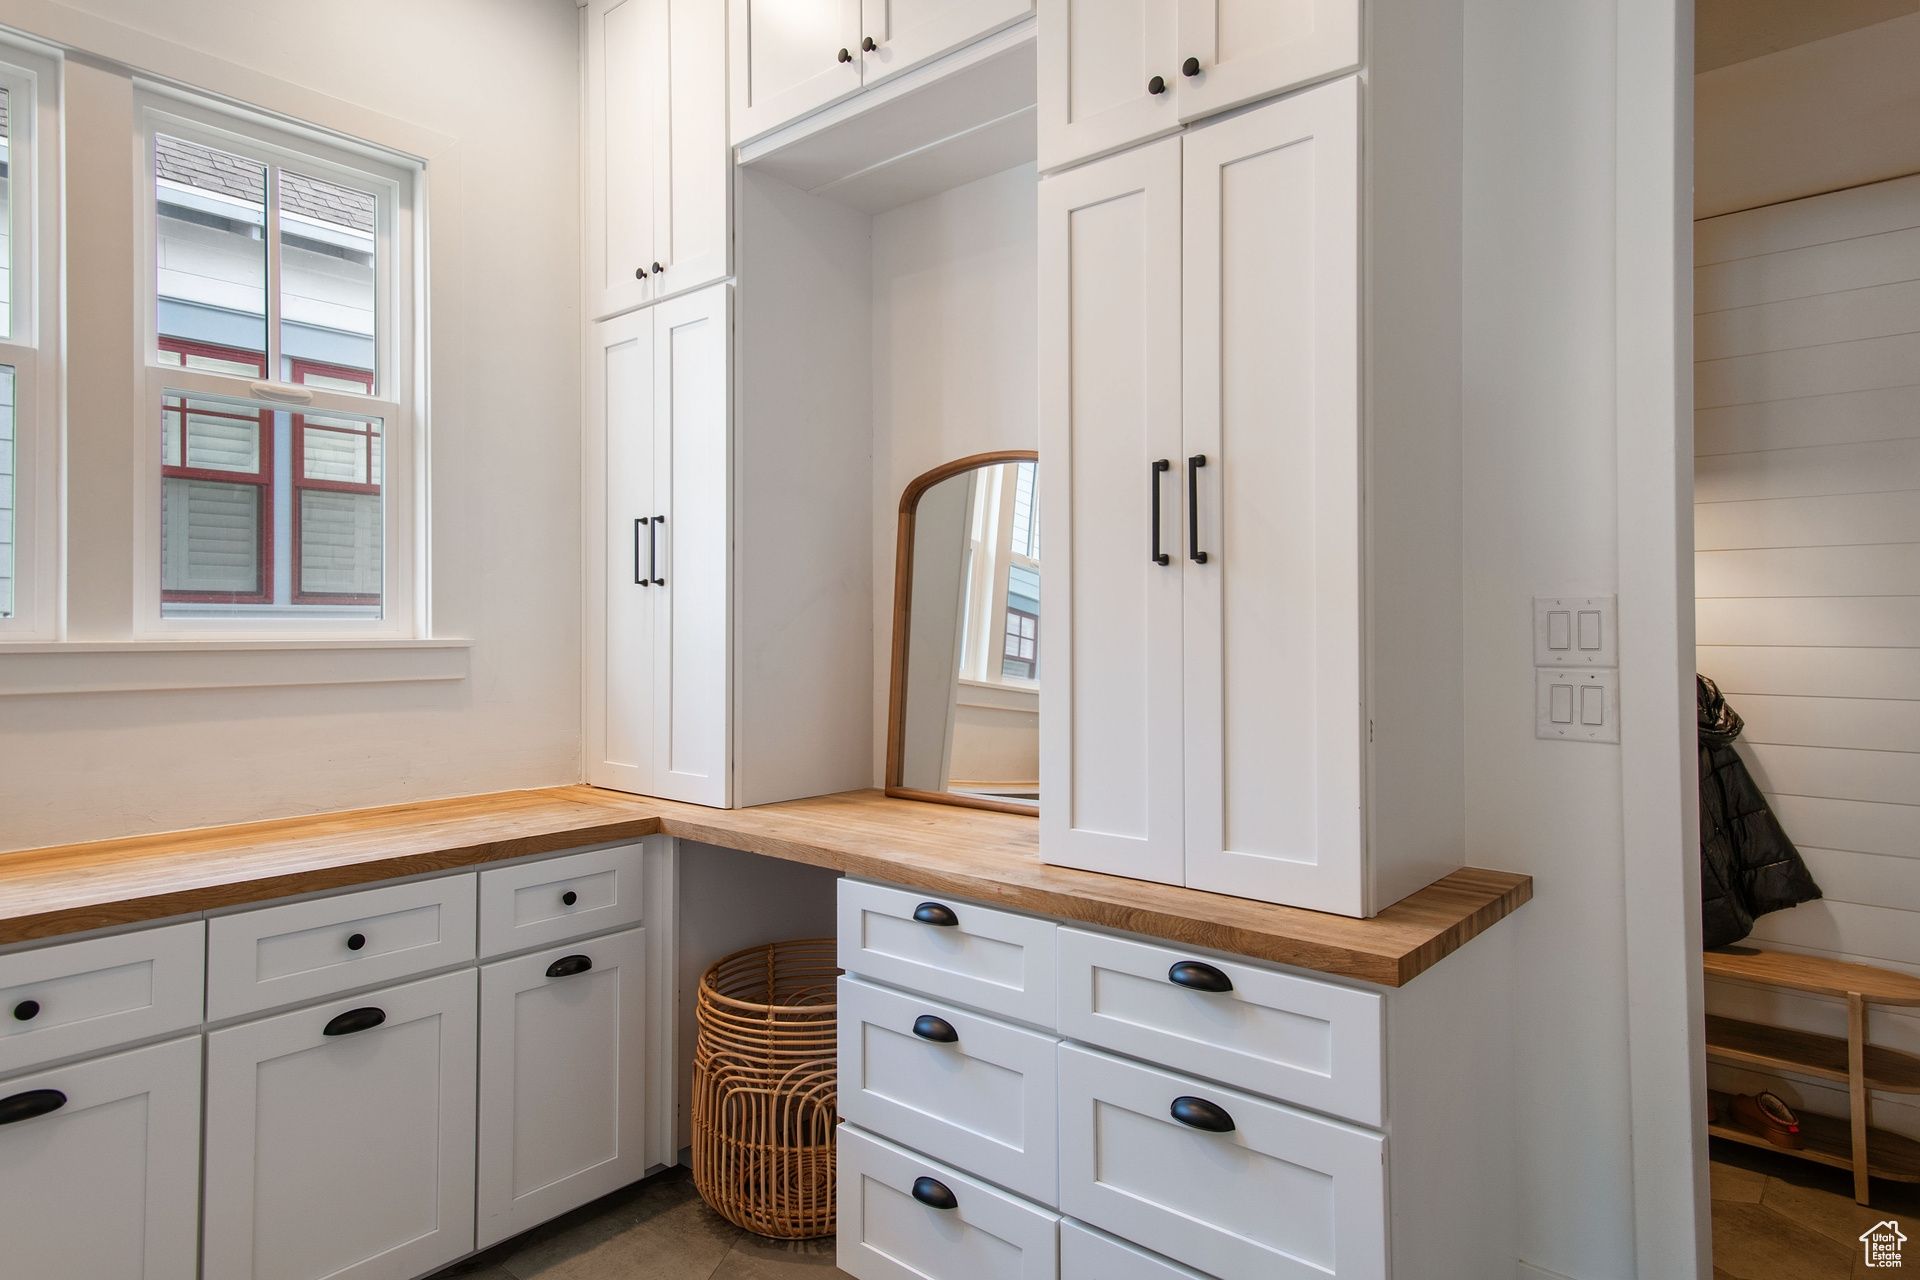 Laundry white cabinetry, butcher block countertops, and dark tile floors